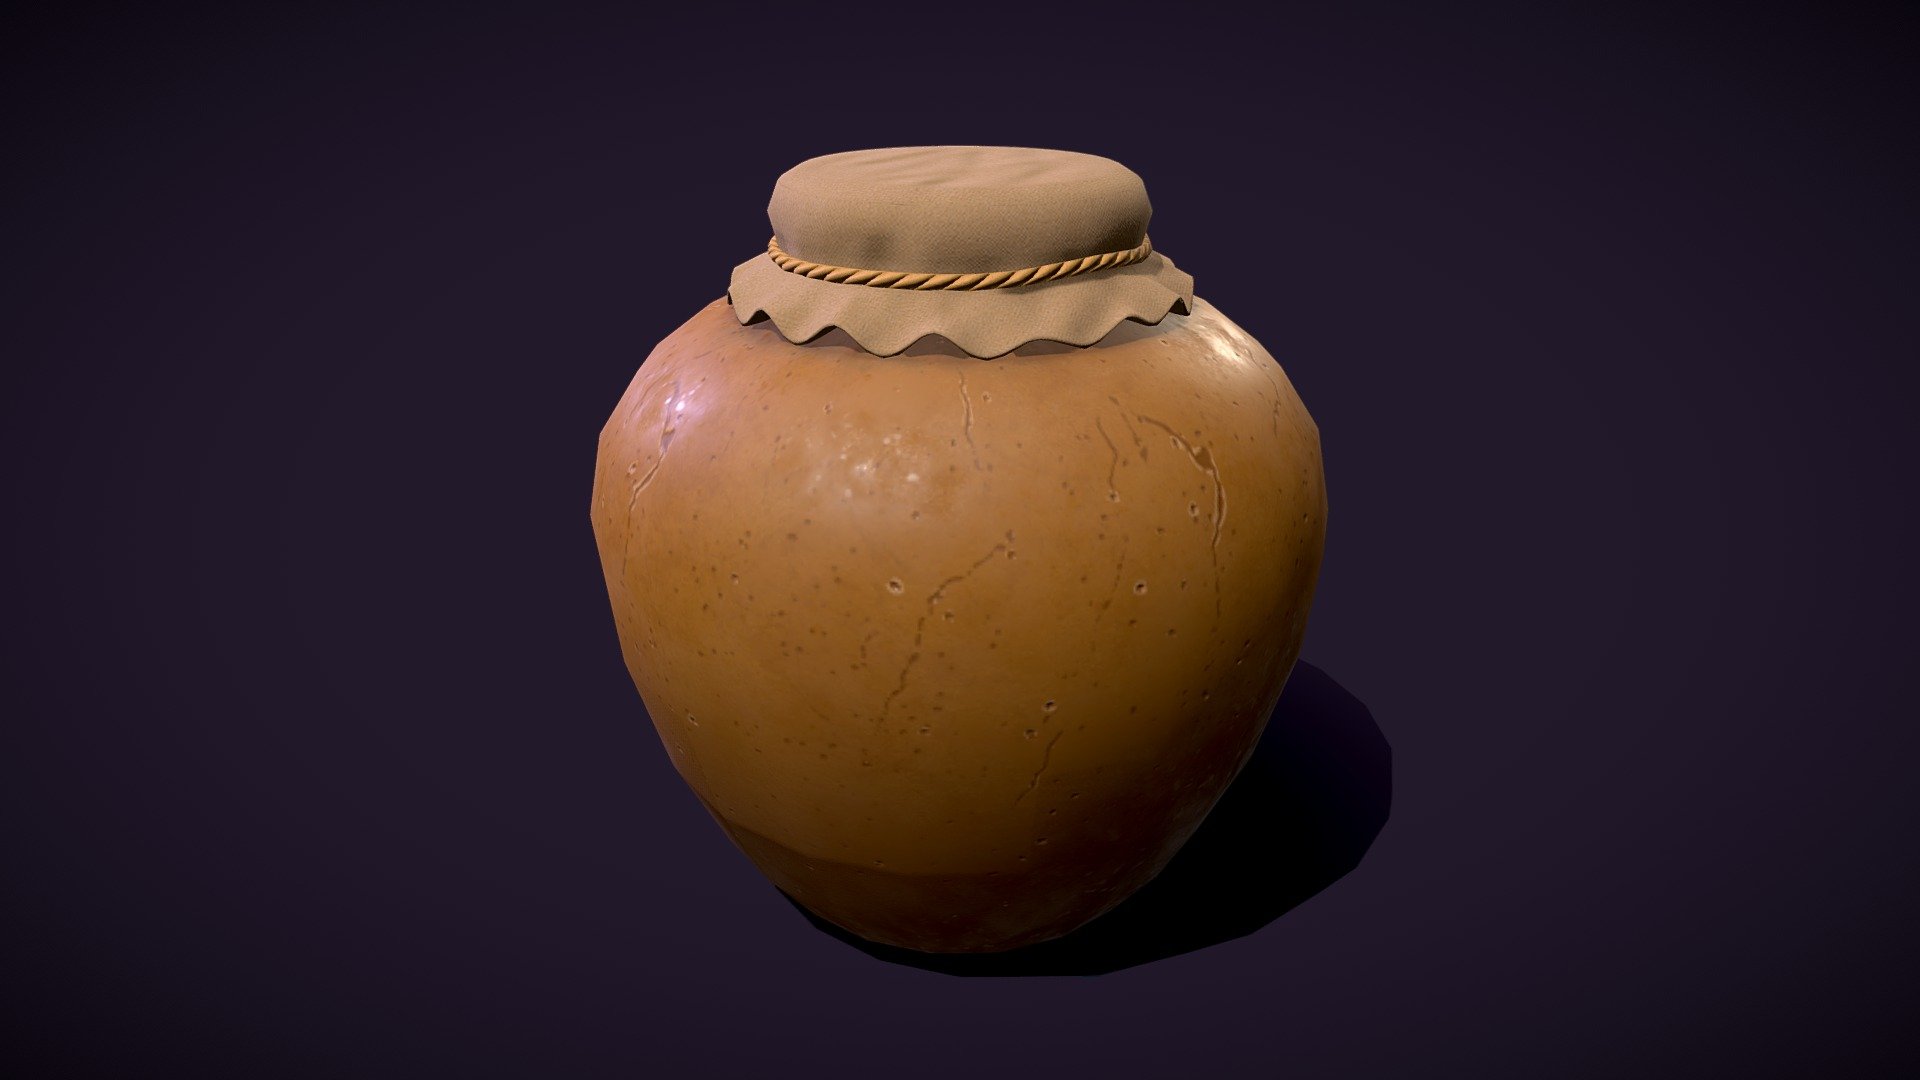 Stylized Medieval Large Vase with Stylized PBR Textures. Suitable for any scene. Ready to use in any project.

Are you liked this model? Feel free to take a look on my another models! Here

Features:

.Fbx, .Obj, .Uasset and .Blend files.

Low Poly Mesh game-ready.

Real-World Scale (centimeters).

Unreal Project: 4.20+

Custom Collision for Unreal Engine 4 (Handmade).

Tris Count: 1,740.

Number of Textures:5

Number of Textures (UE4): 3

PBR Textures (1024x1024) (PNG).

Type of Textures: Base Color, Roughness, Metallic, Normal Map and Ambient Occlusion (PNG)

Combined RMA texture (Roughness, Metallic and Ambient Occlusion) for Unreal Engine (PNG) 3d model